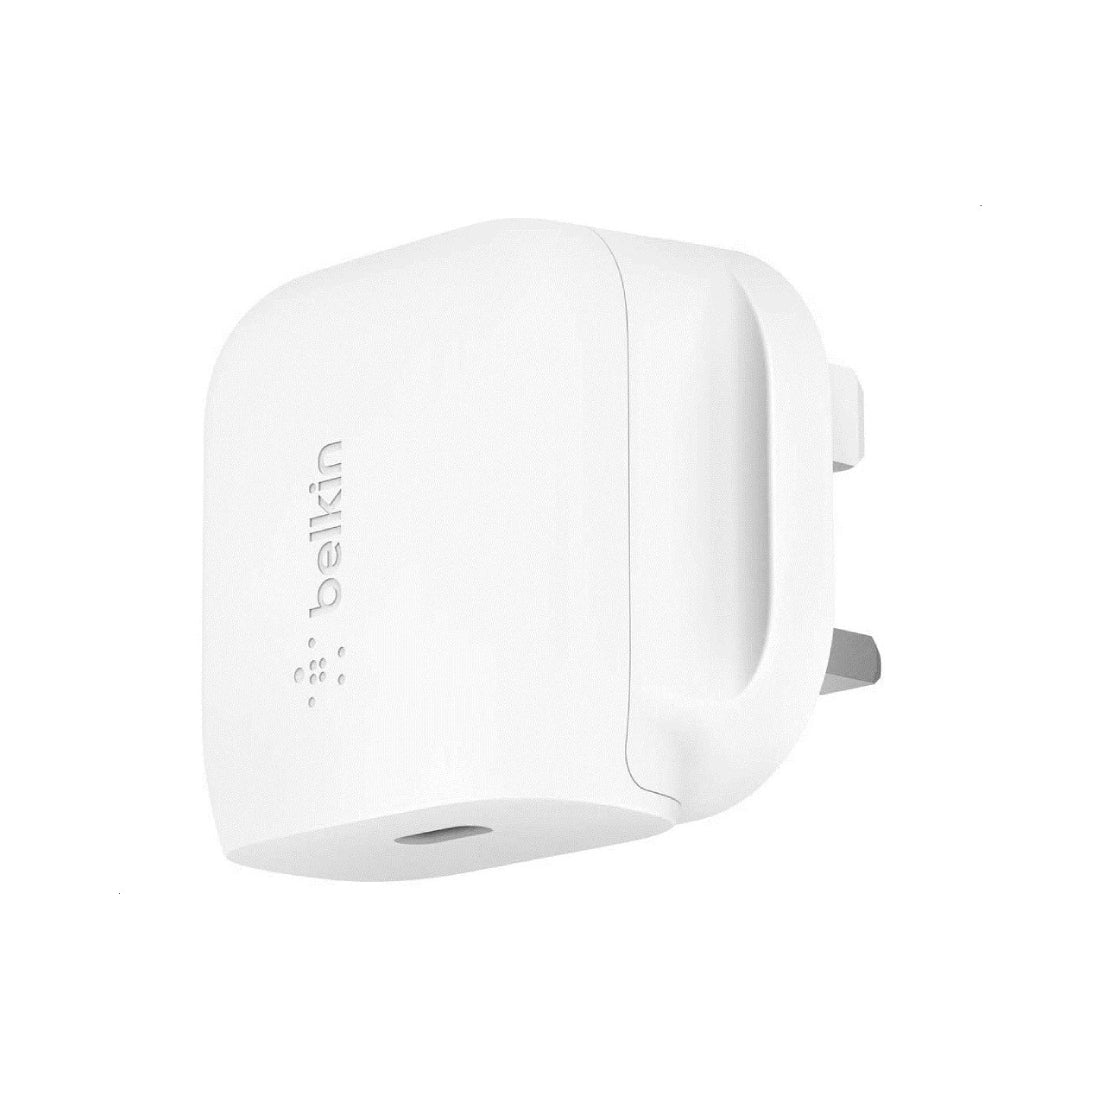 Belkin BoostCharge USB-C PD Wall Charger 20W - White - شاحن - Store 974 | ستور ٩٧٤